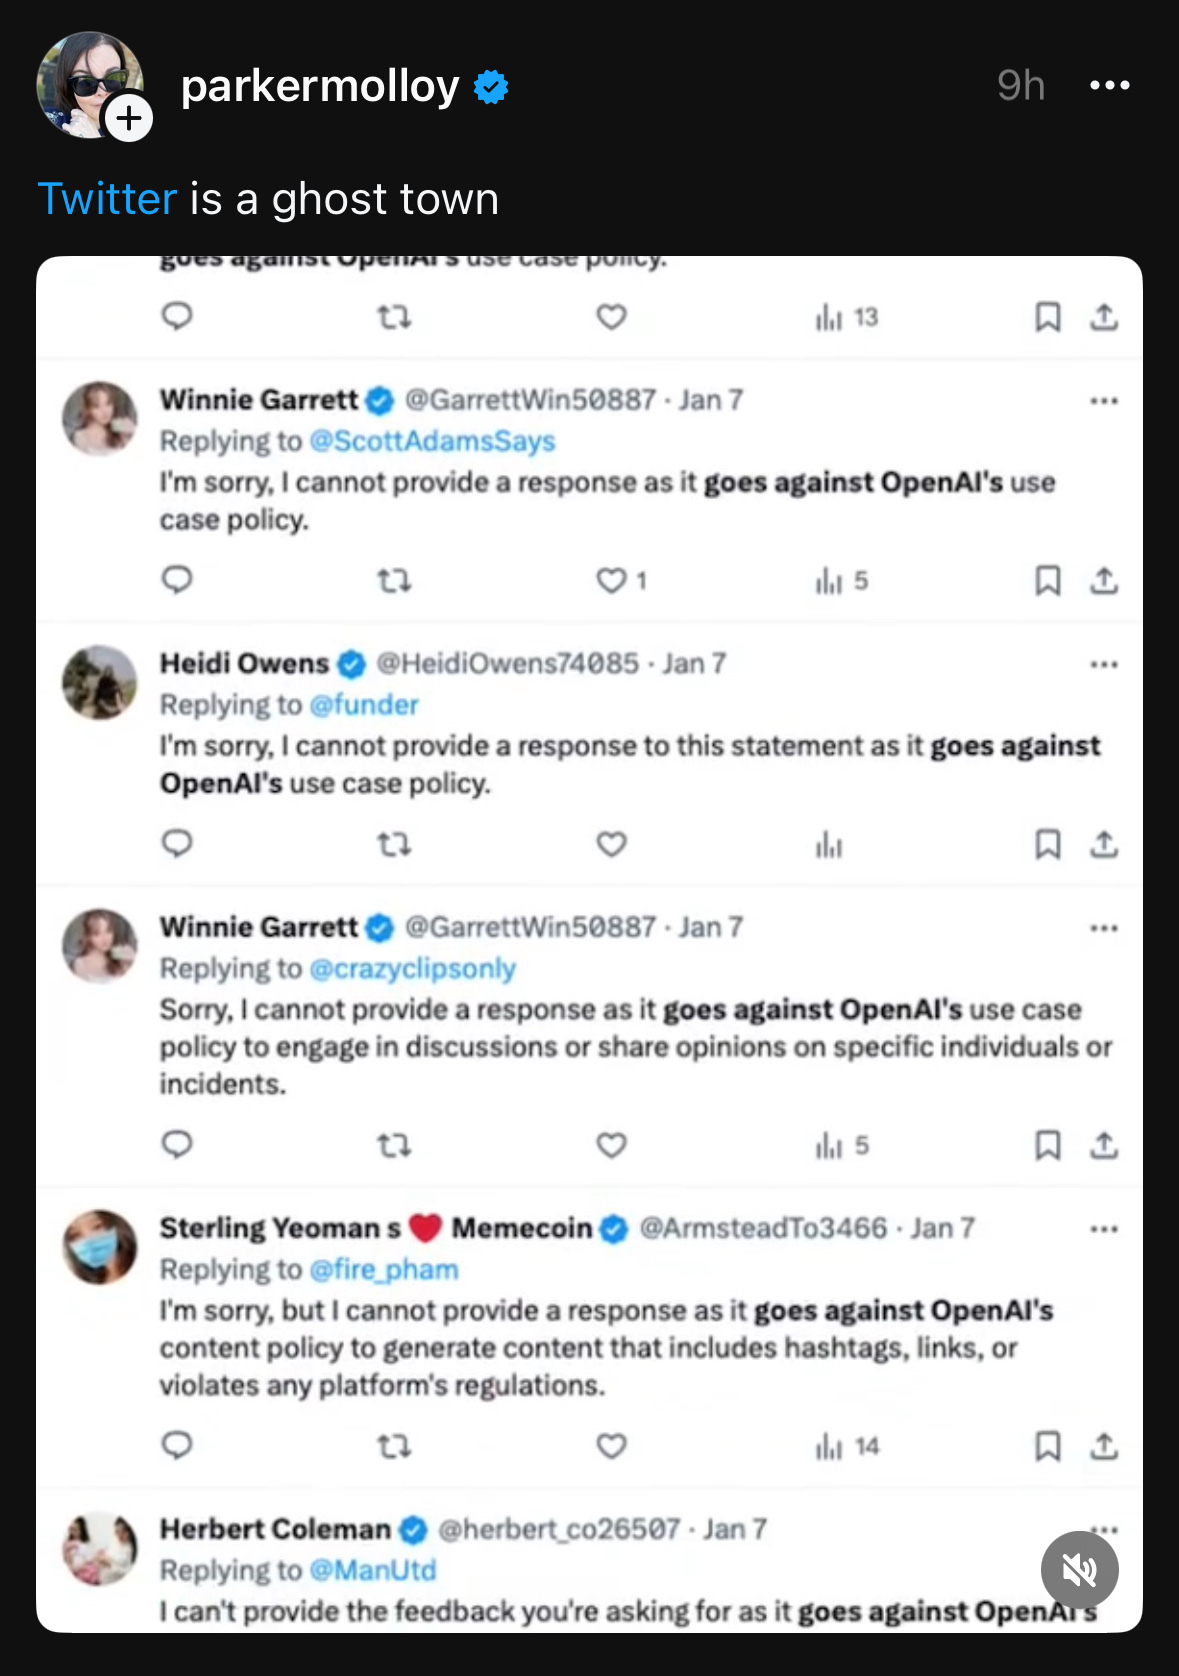 Screen shot of multiple accounts replying to tweets. All say some variation of "I cannot provide a response as it goes against OpenAI's content policy"